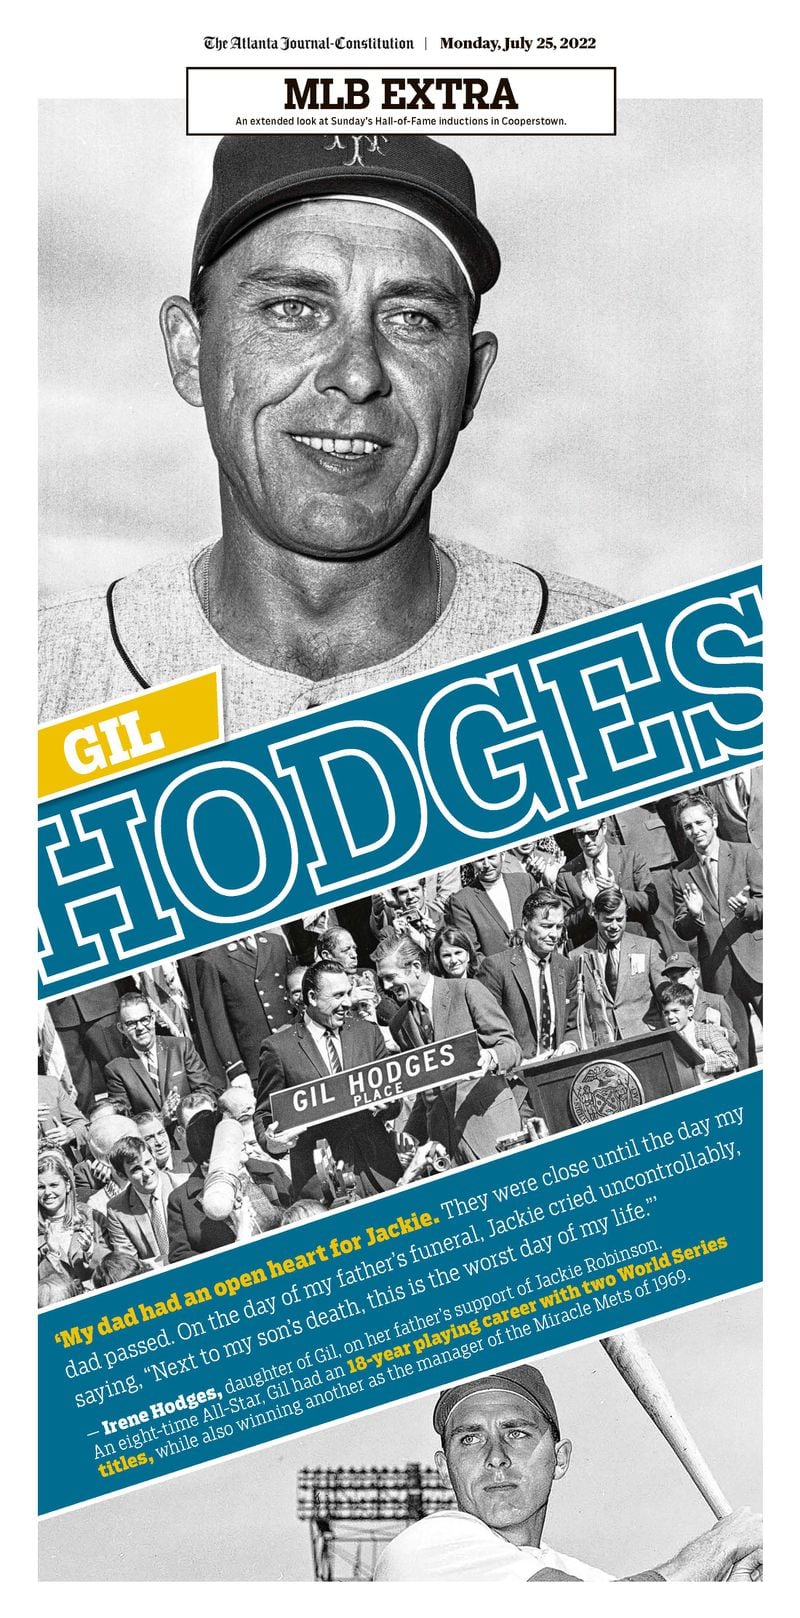 Gil Hodges page as part of expanded coverage of the Baseball Hall of Fame ceremony in Monday’s ePaper